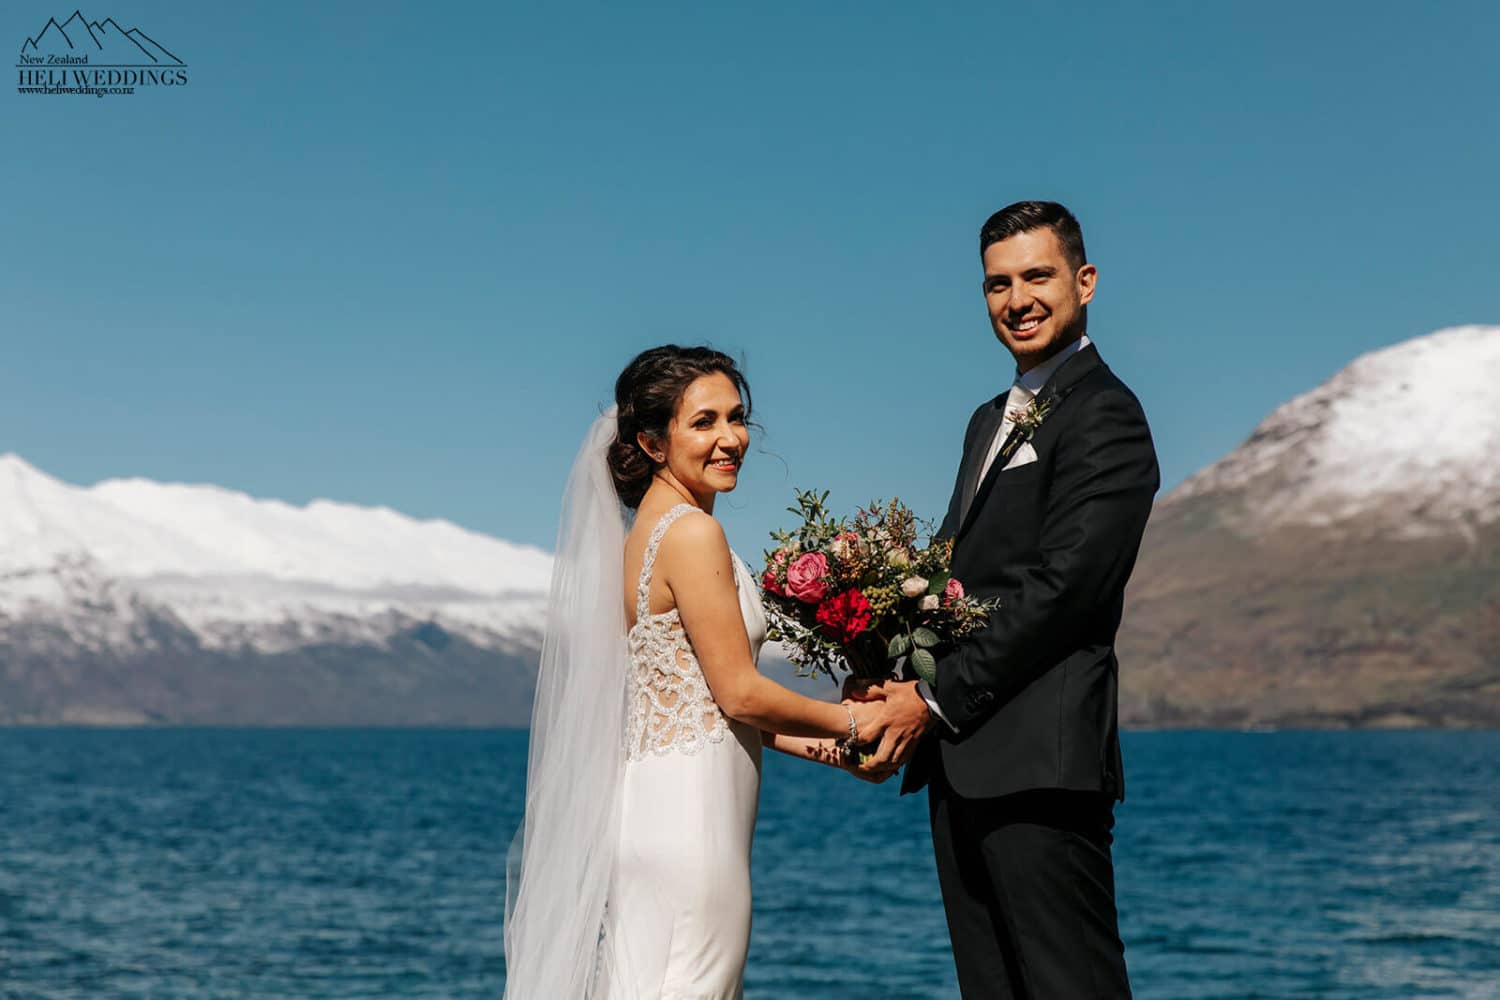 Wedding ceremony by the lake in Queenstown